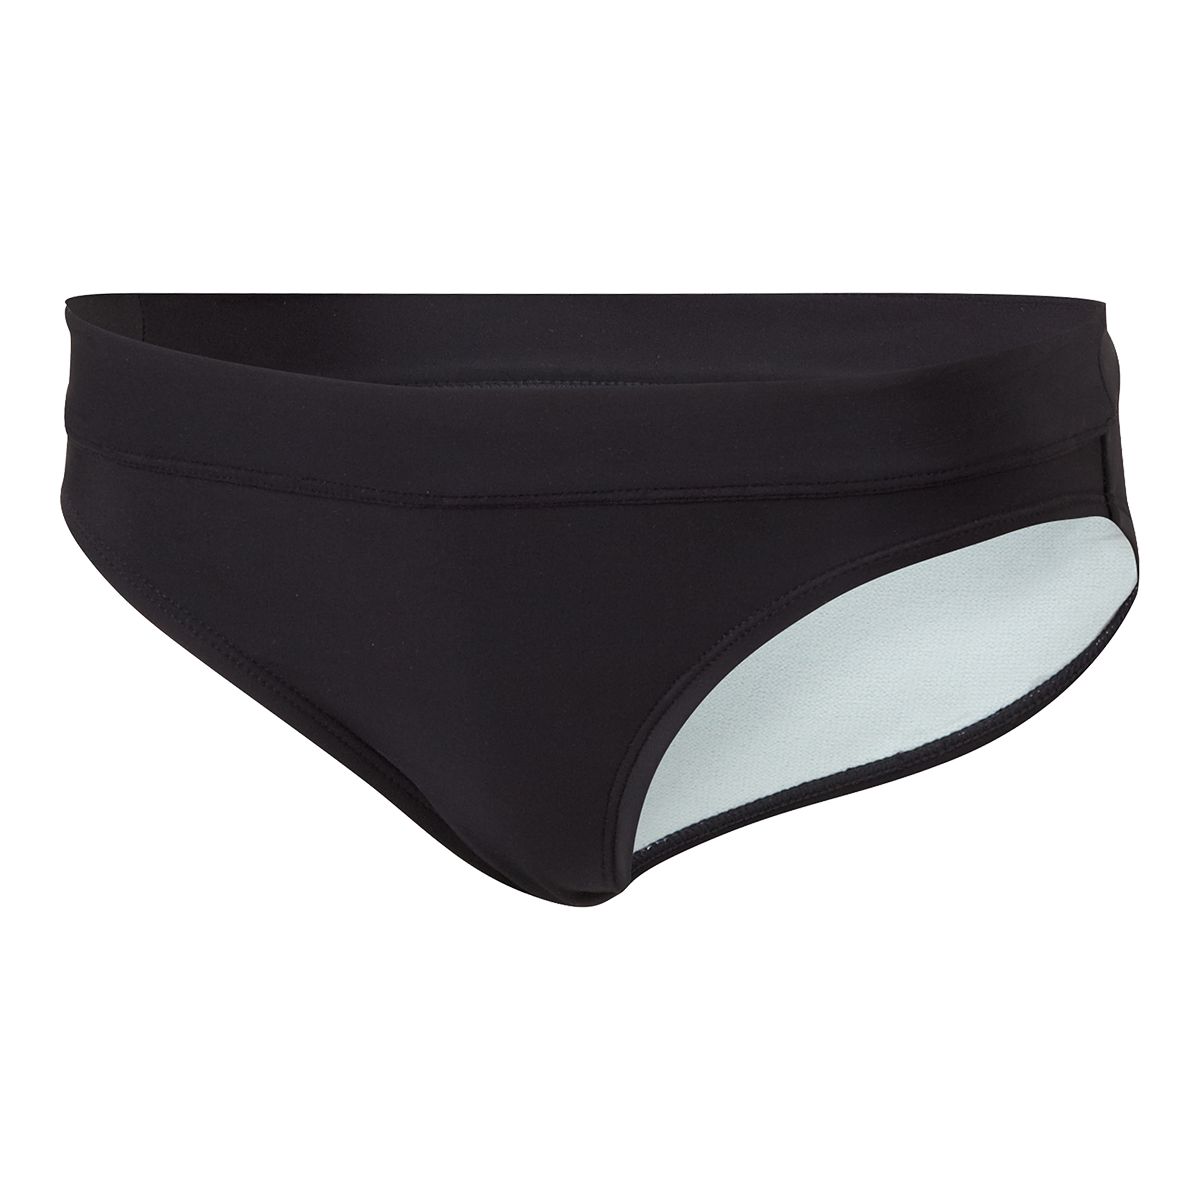 https://media-www.atmosphere.ca/product/div-03-softgoods/dpt-70-athletic-clothing/sdpt-02-womens/331974014/nike-w-core-bottom-brief-f2-black-s--6ed69468-817f-4e1b-a1c8-98154225d0ac-jpgrendition.jpg?imdensity=1&imwidth=1244&impolicy=mZoom